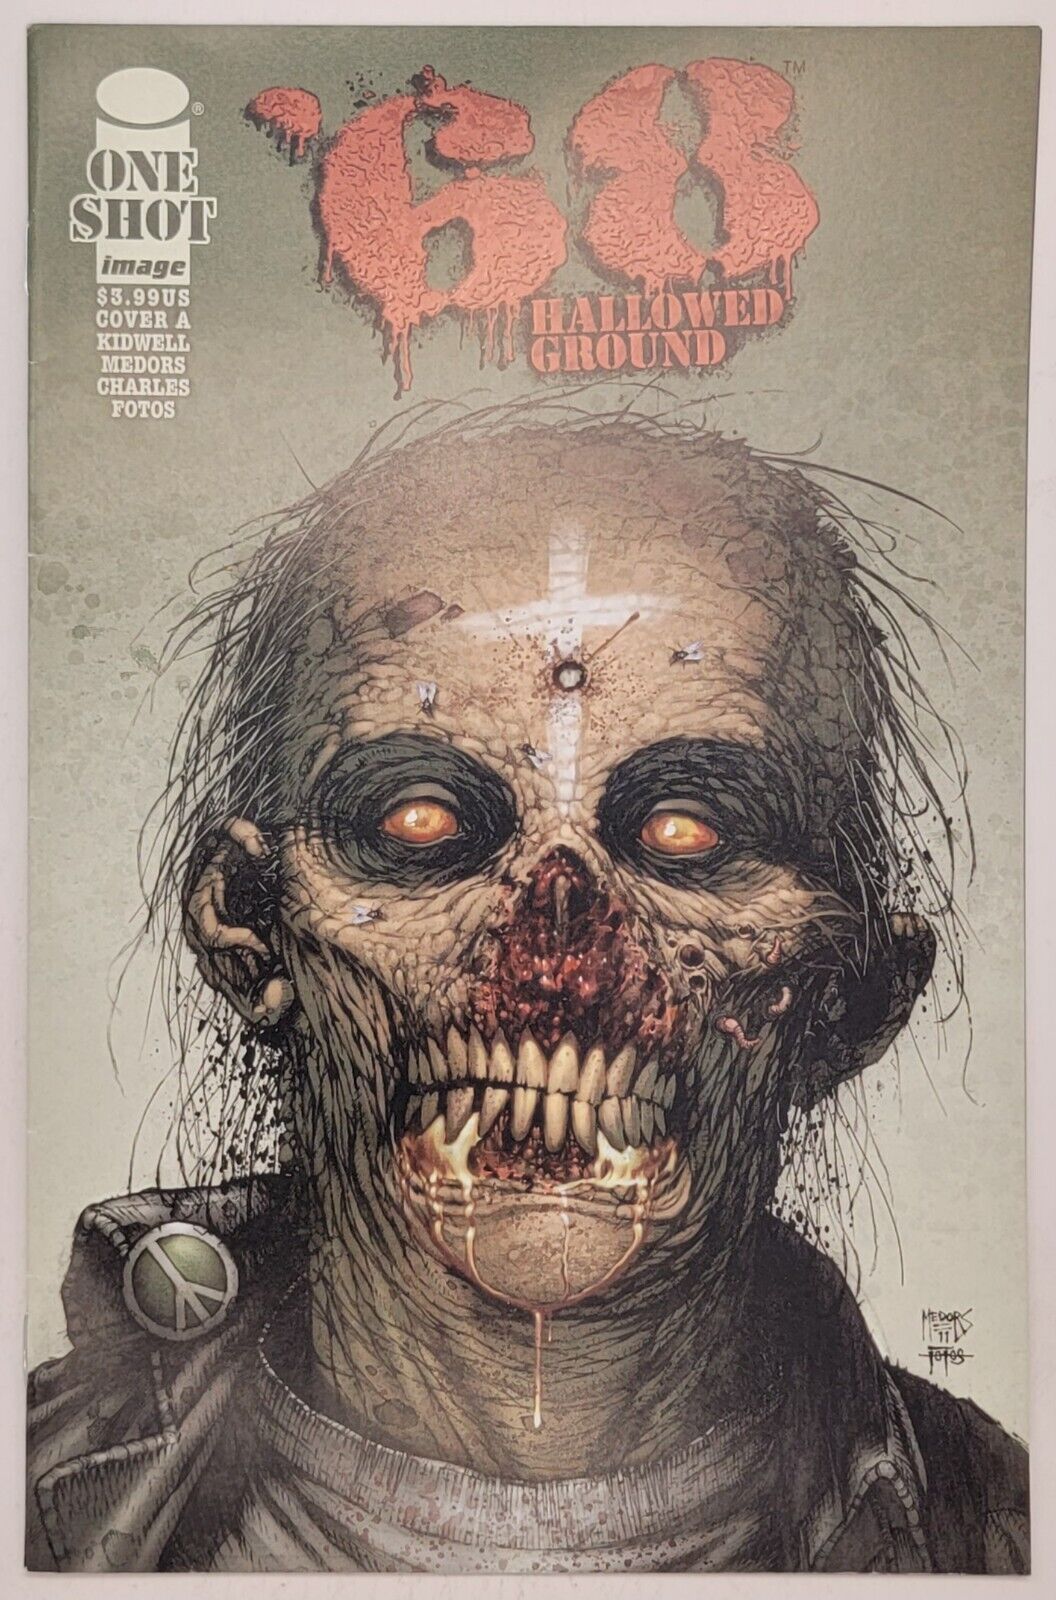 68 HALLOWED GROUND Cover A Variant Zombie Cover Comic Image Comics Brand New